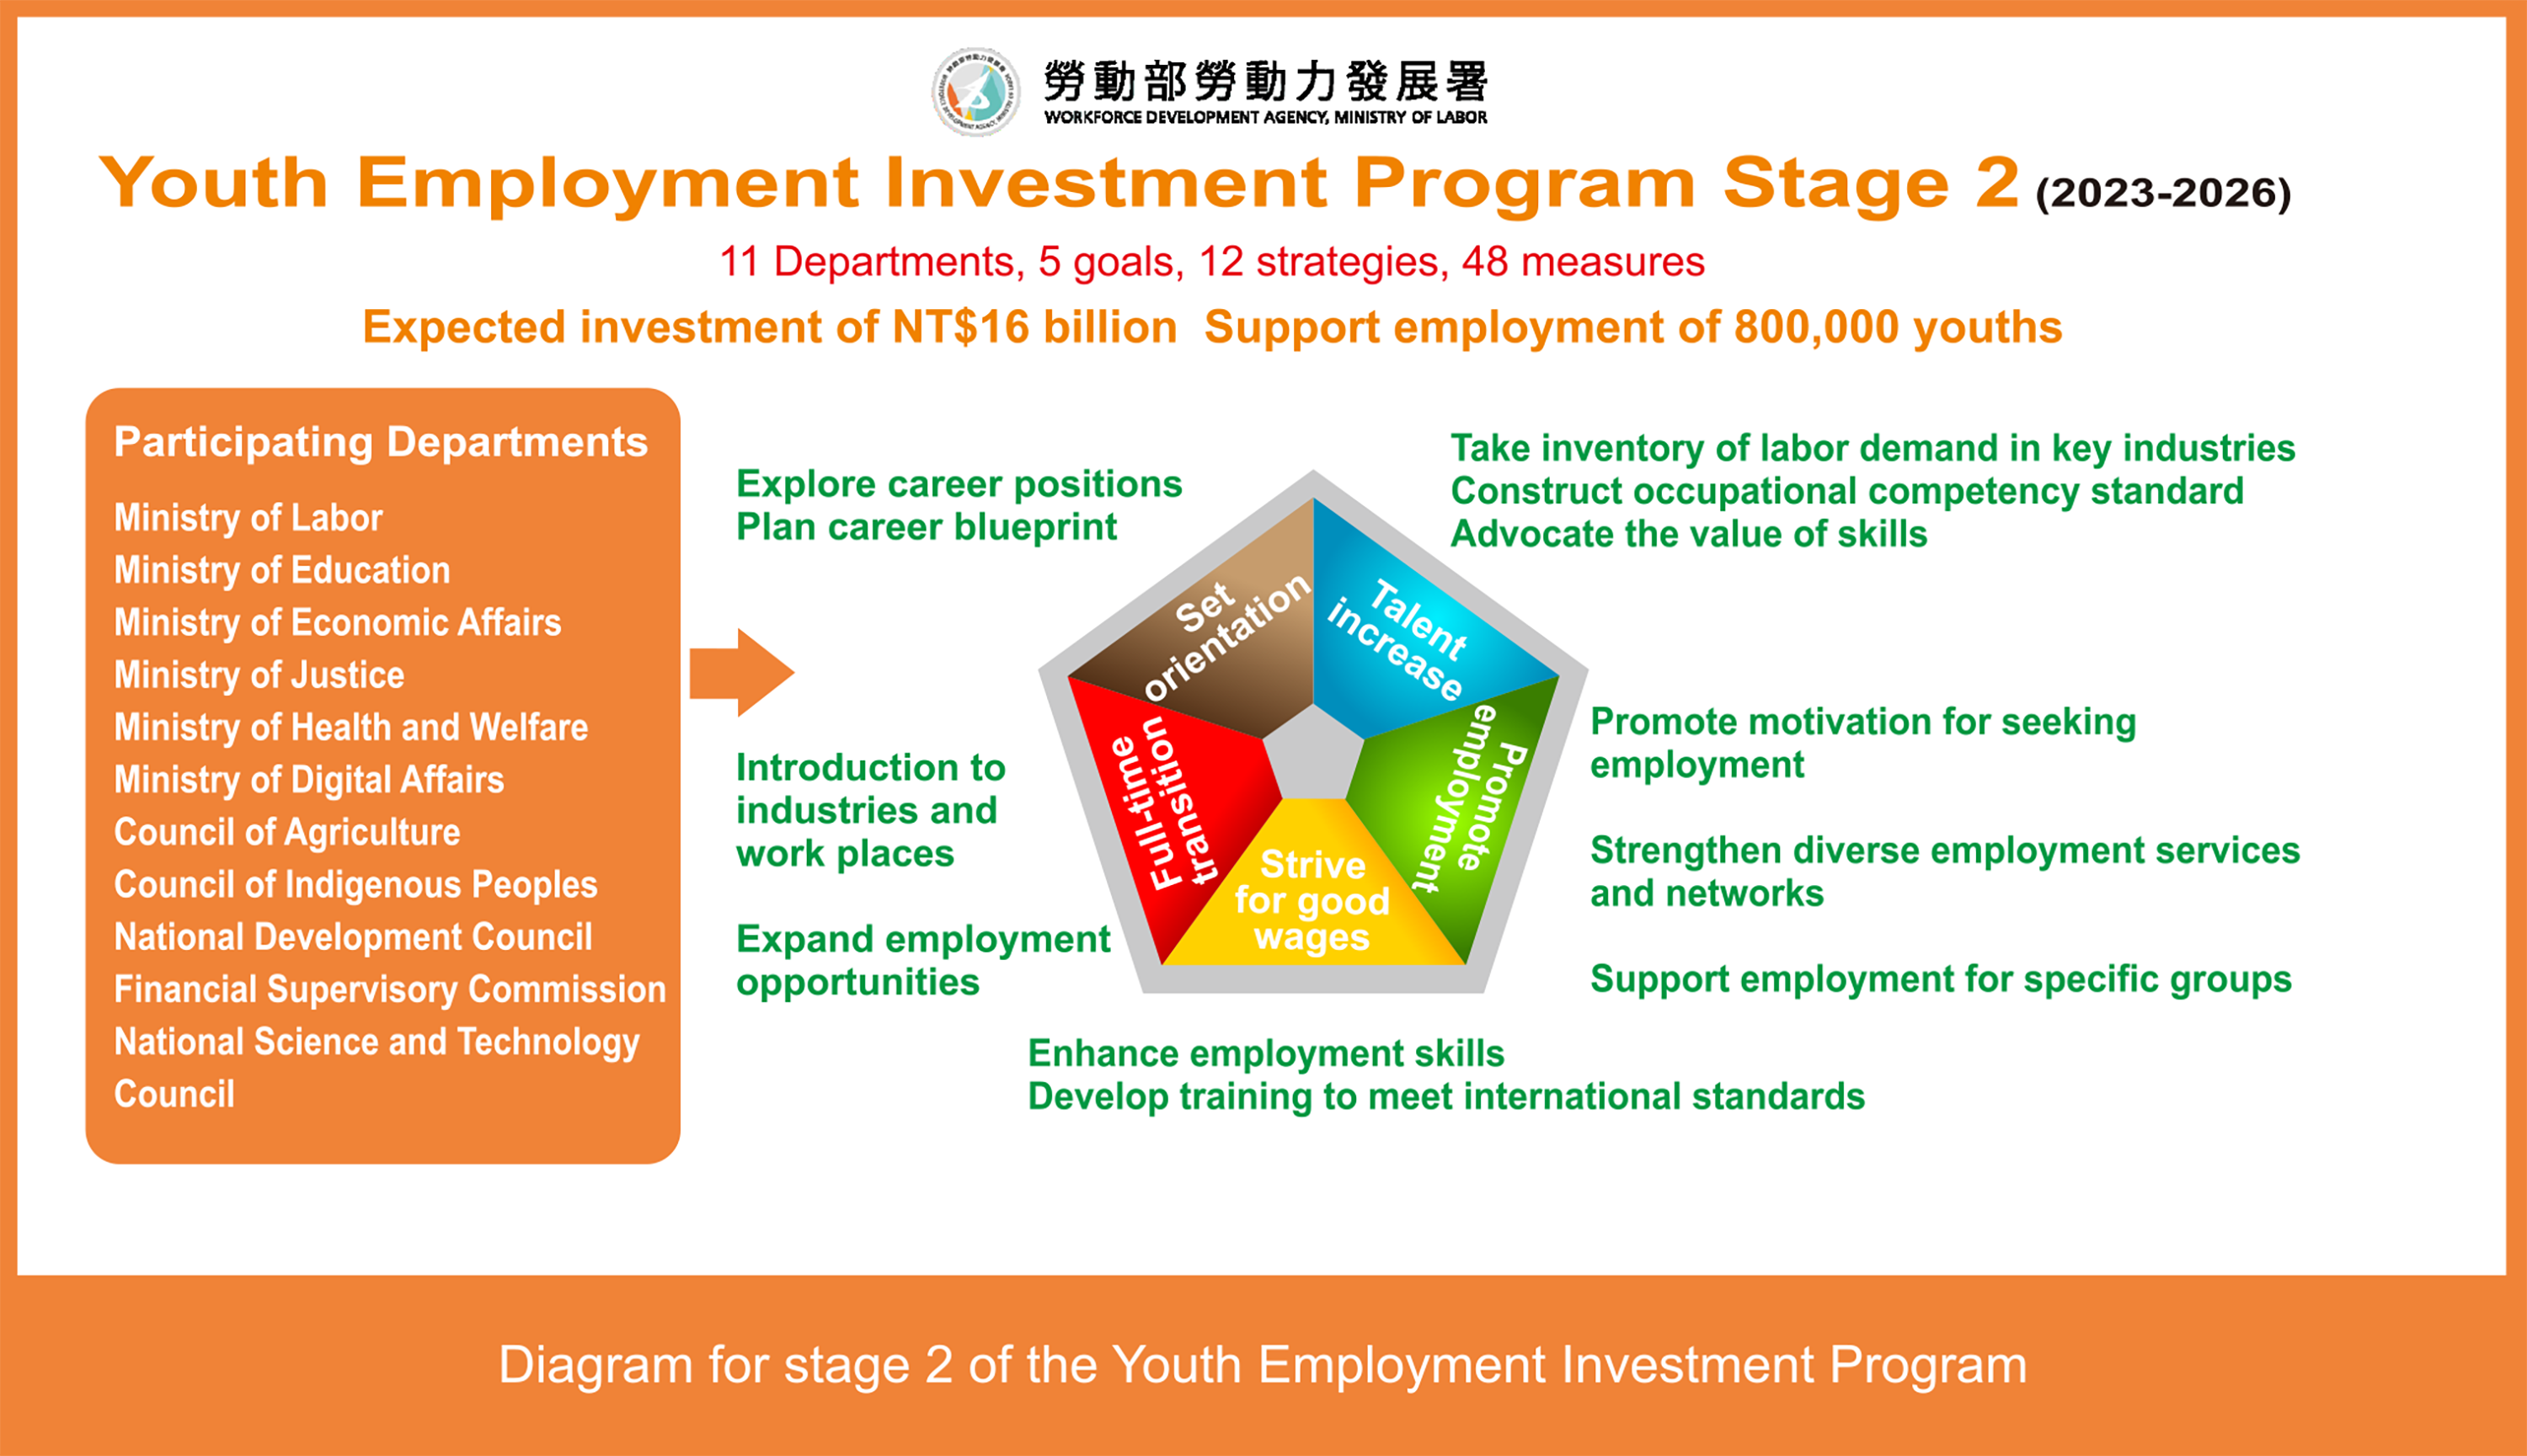 The Youth Employment Investment Program Enters Stage 2, Investing NT$16 Billion in 5 Targets, 12 Strategies, and 48 Measures to Help 800,000 Youths Find Employment